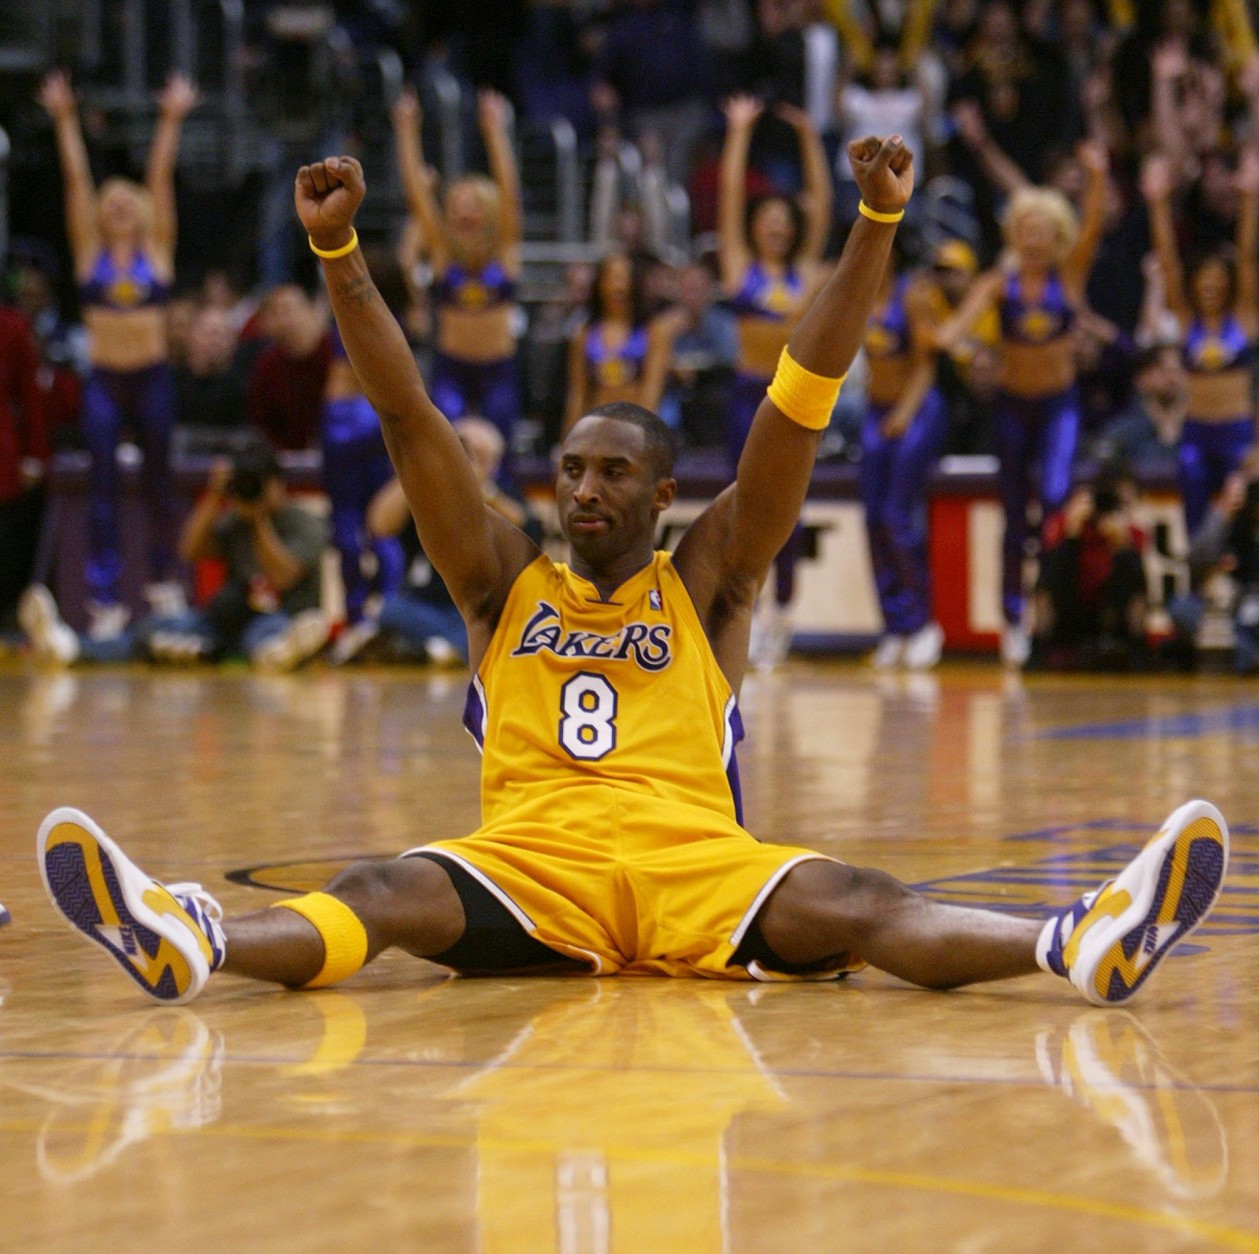 Los Angeles Lakers' Kobe Bryant reacts after hitting the game-winning basket in the Lakers' 101-99 win over the Denver Nuggets on Friday, Dec. 19, 2003, in Los Angeles. Bryant was in court for a pretrial hearing on his sexual assualt charge in Eagle, Colo., earlier Friday and missed the first quarter. (AP Photo/Chris Carlson)